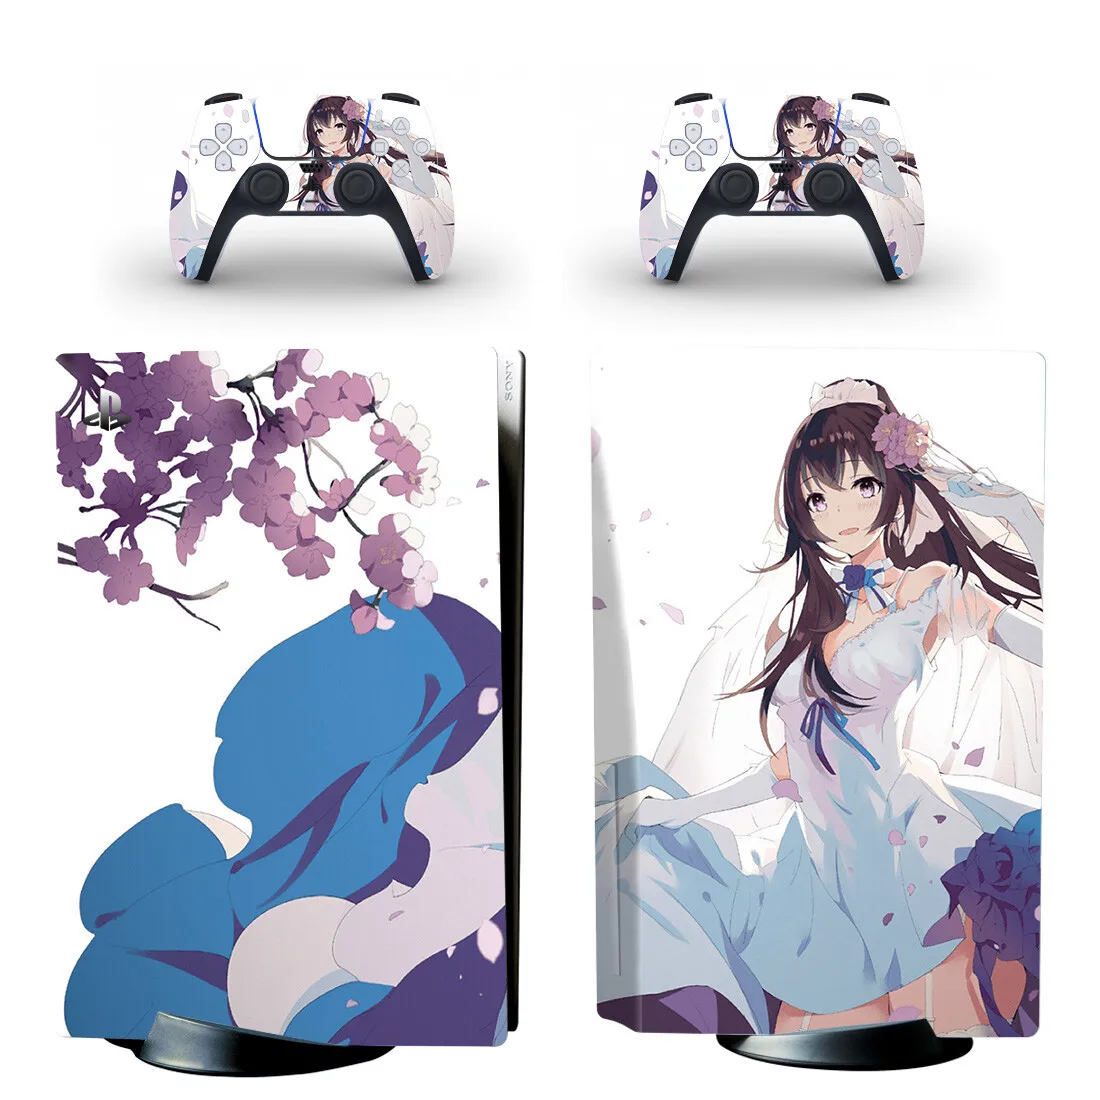 

Anime Cute Girl PS5 Disc Skin Sticker Cover for Playstation 5 Console & 2 Controllers Decal Vinyl Protective Disk Skins